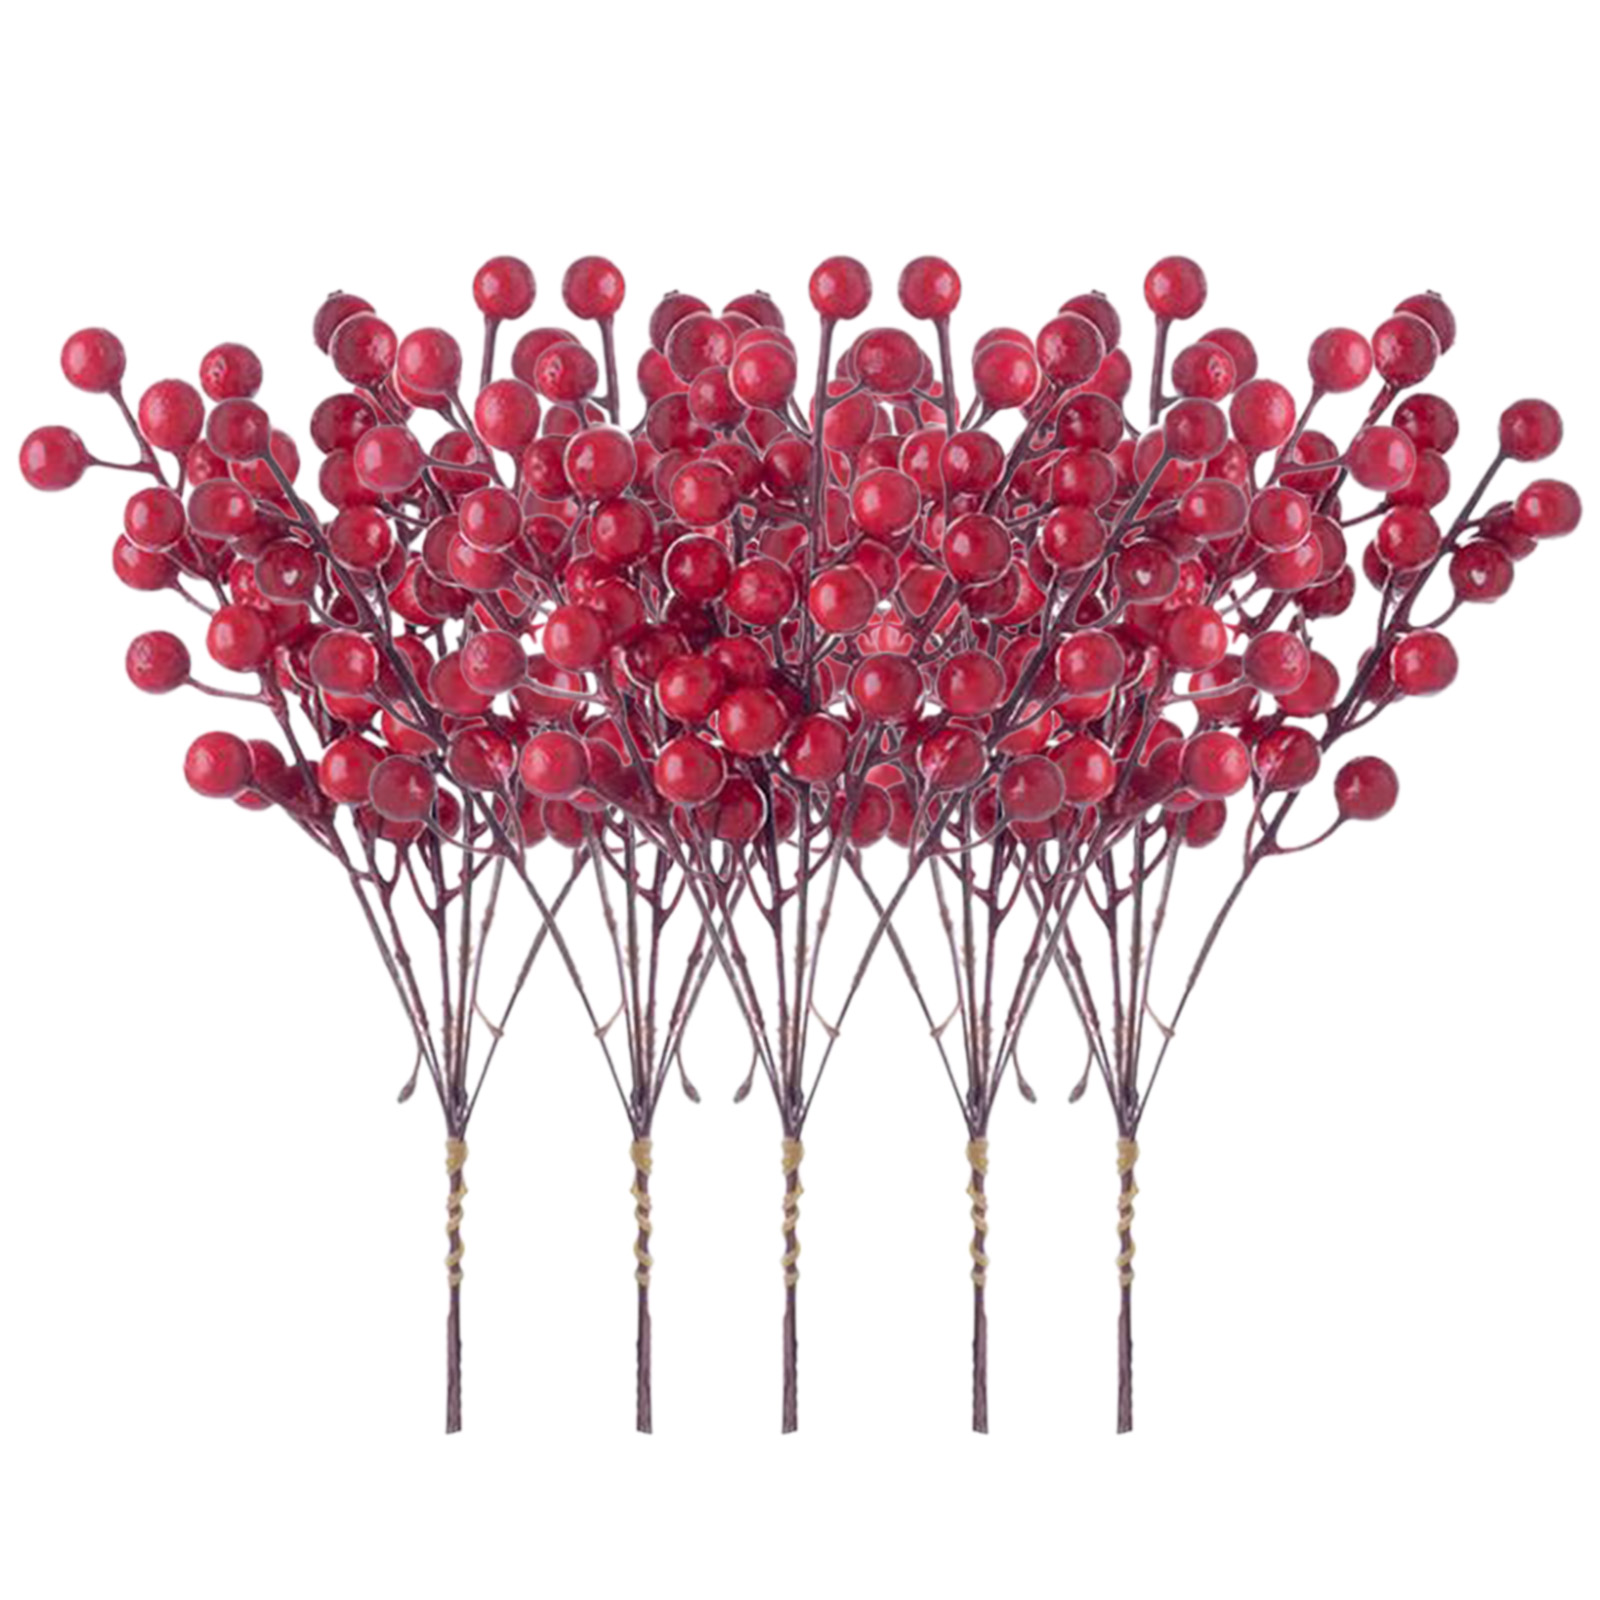 6 Heads 5pcs/Bunch Artificial Berries Branch Fake Plants Flowers Bouquet DIY Wreath Supplies Accessories For Christmas Party Home Decor red